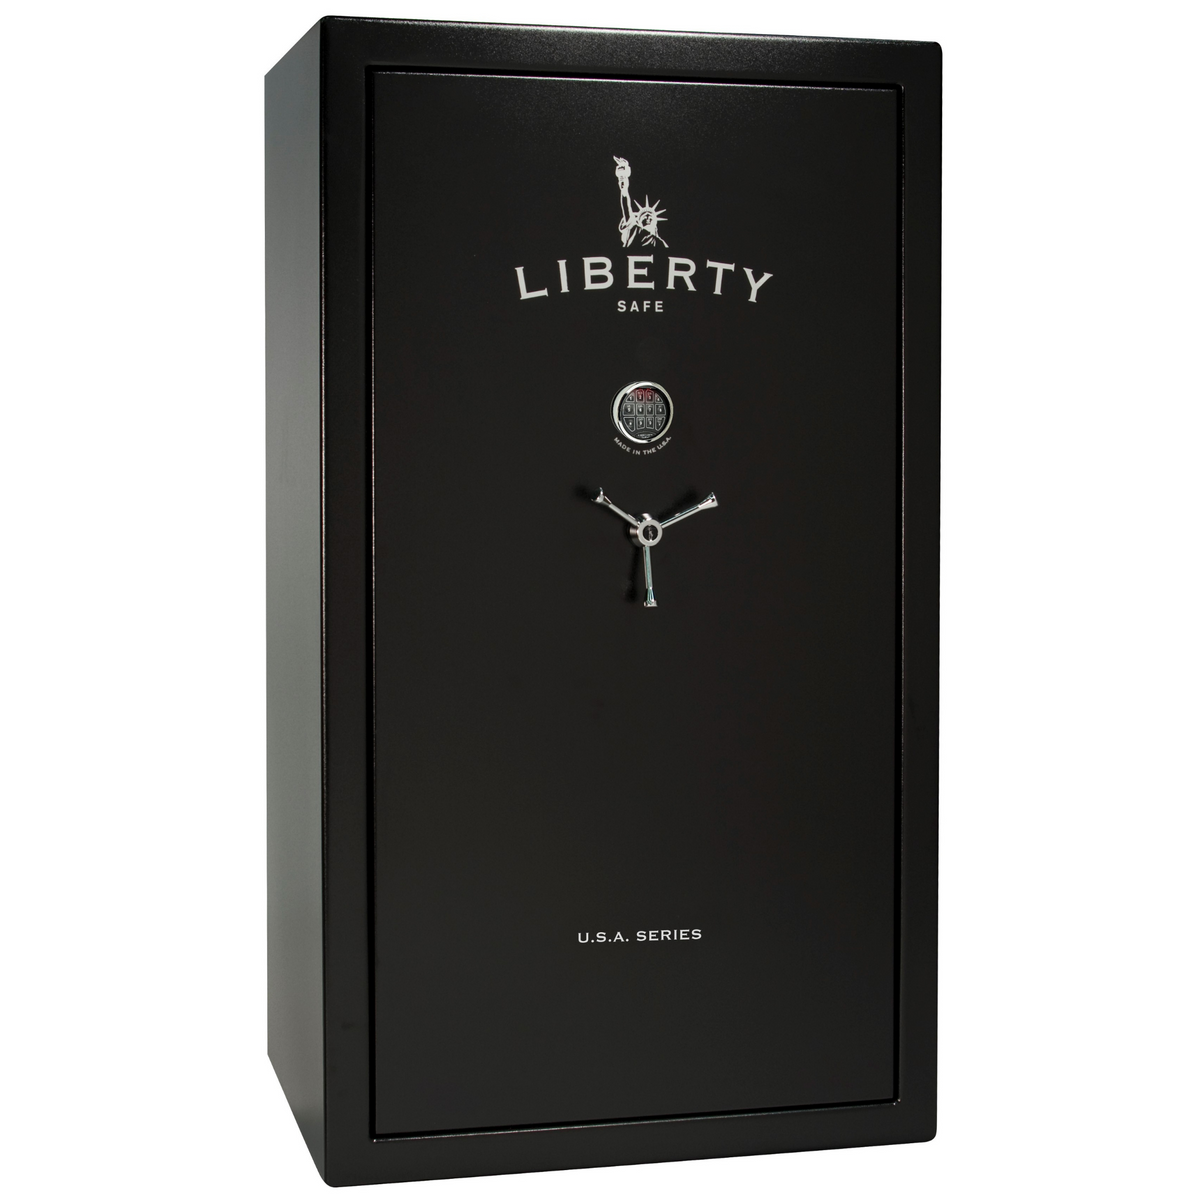 USA 50 Limited Edition | Level 3 Security | 60 Minute Fire Rating | Liberty Safe Norcal.